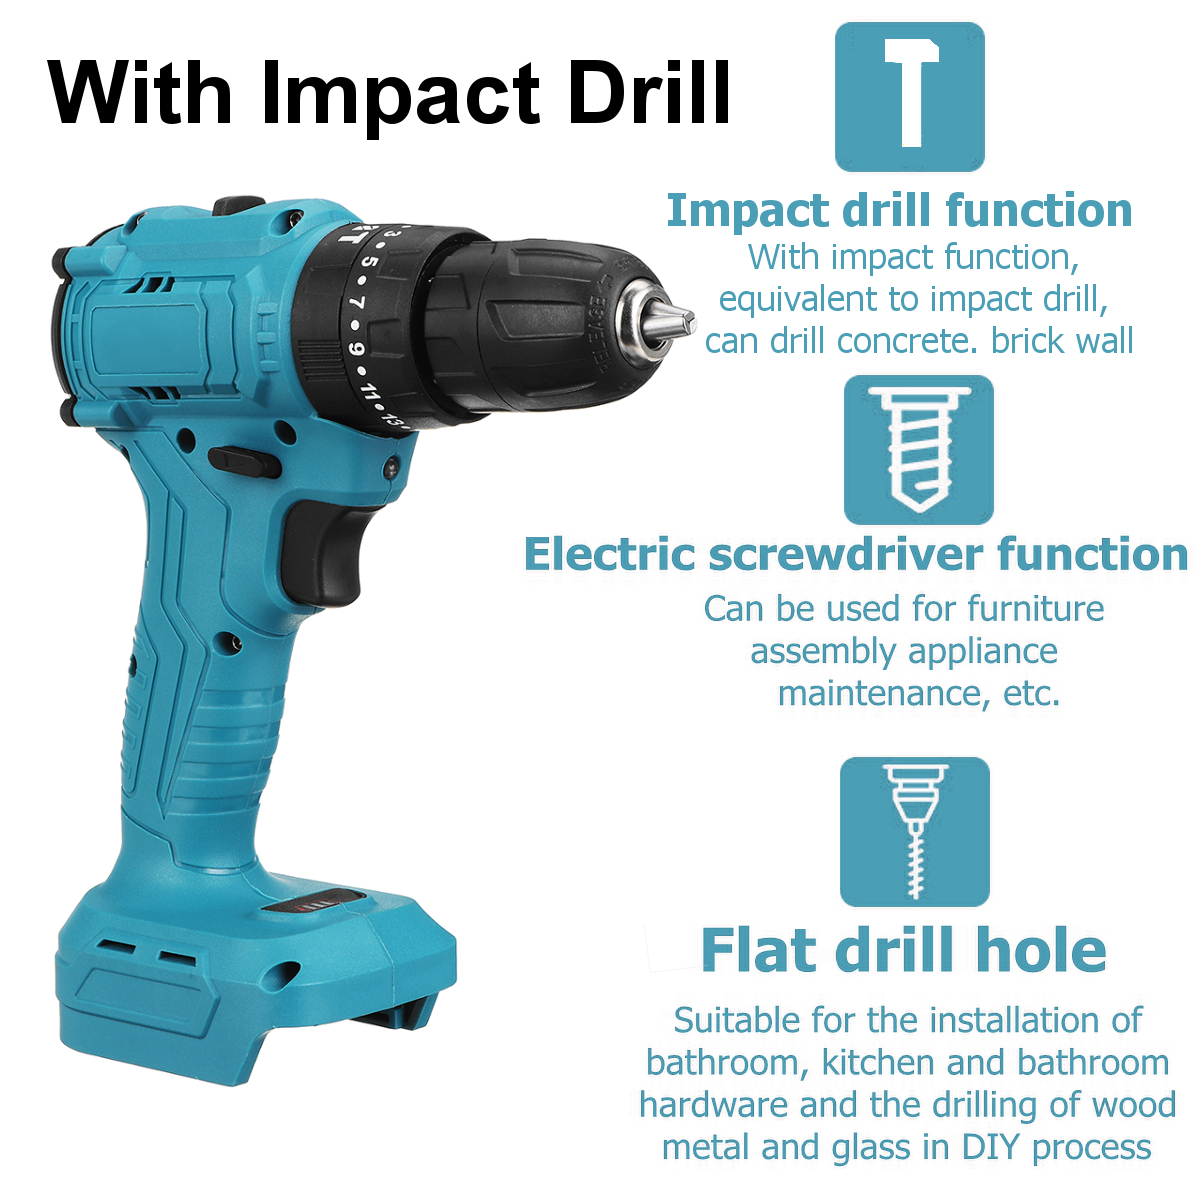 520Nm-Brushless-Cordless-38-Electric-Impact-Drill-Driver-Replacement-for-Makita-18V-Battery-1733295-9